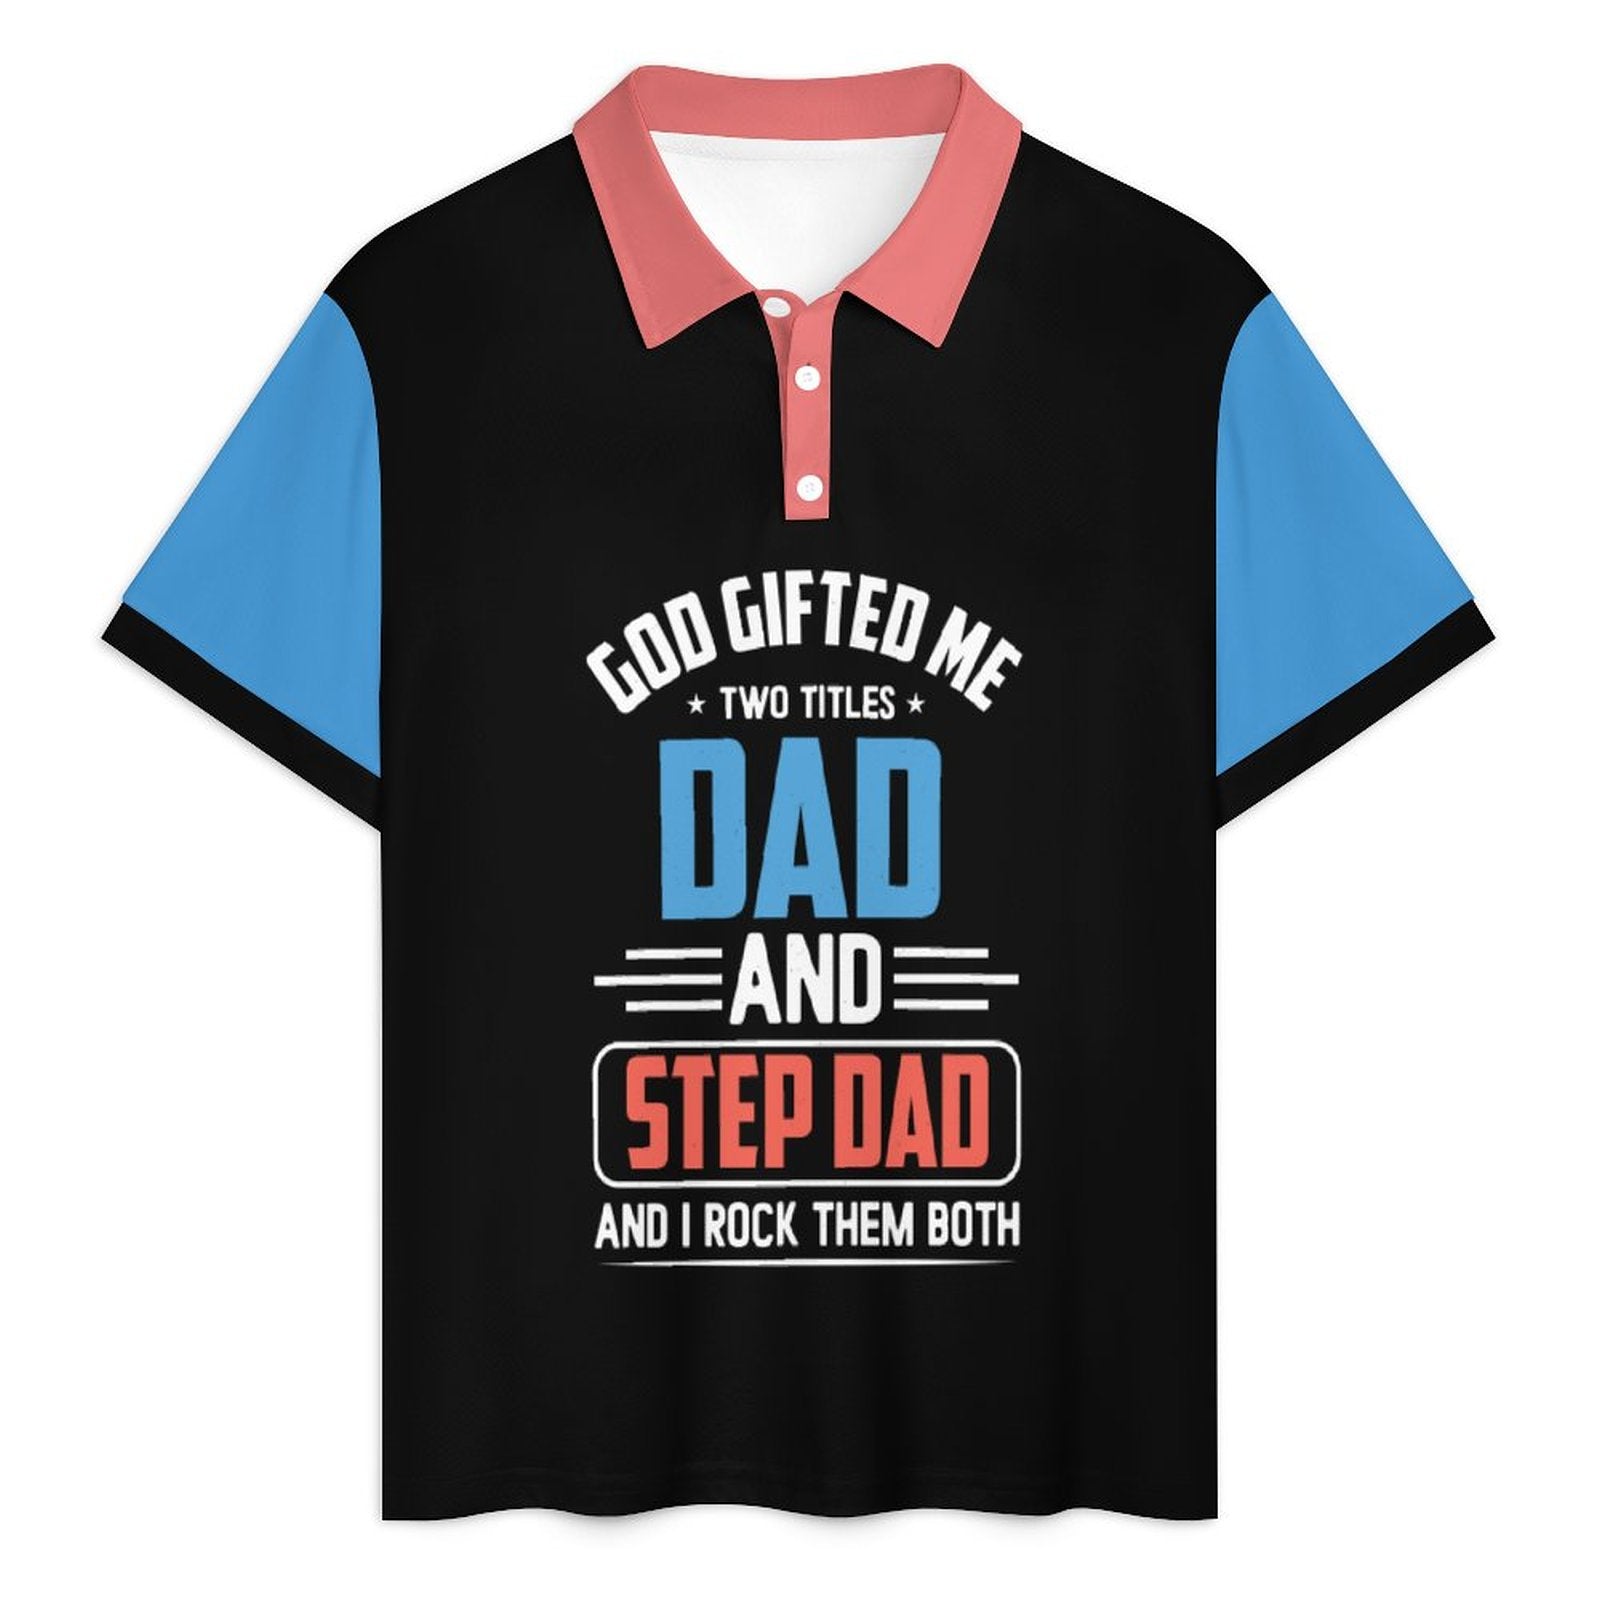 God Gifted Me Two Titles Dad And Step Dad And I Rock Them Both Men's Christian Casual Outfit Polo Set SALE-Personal Design